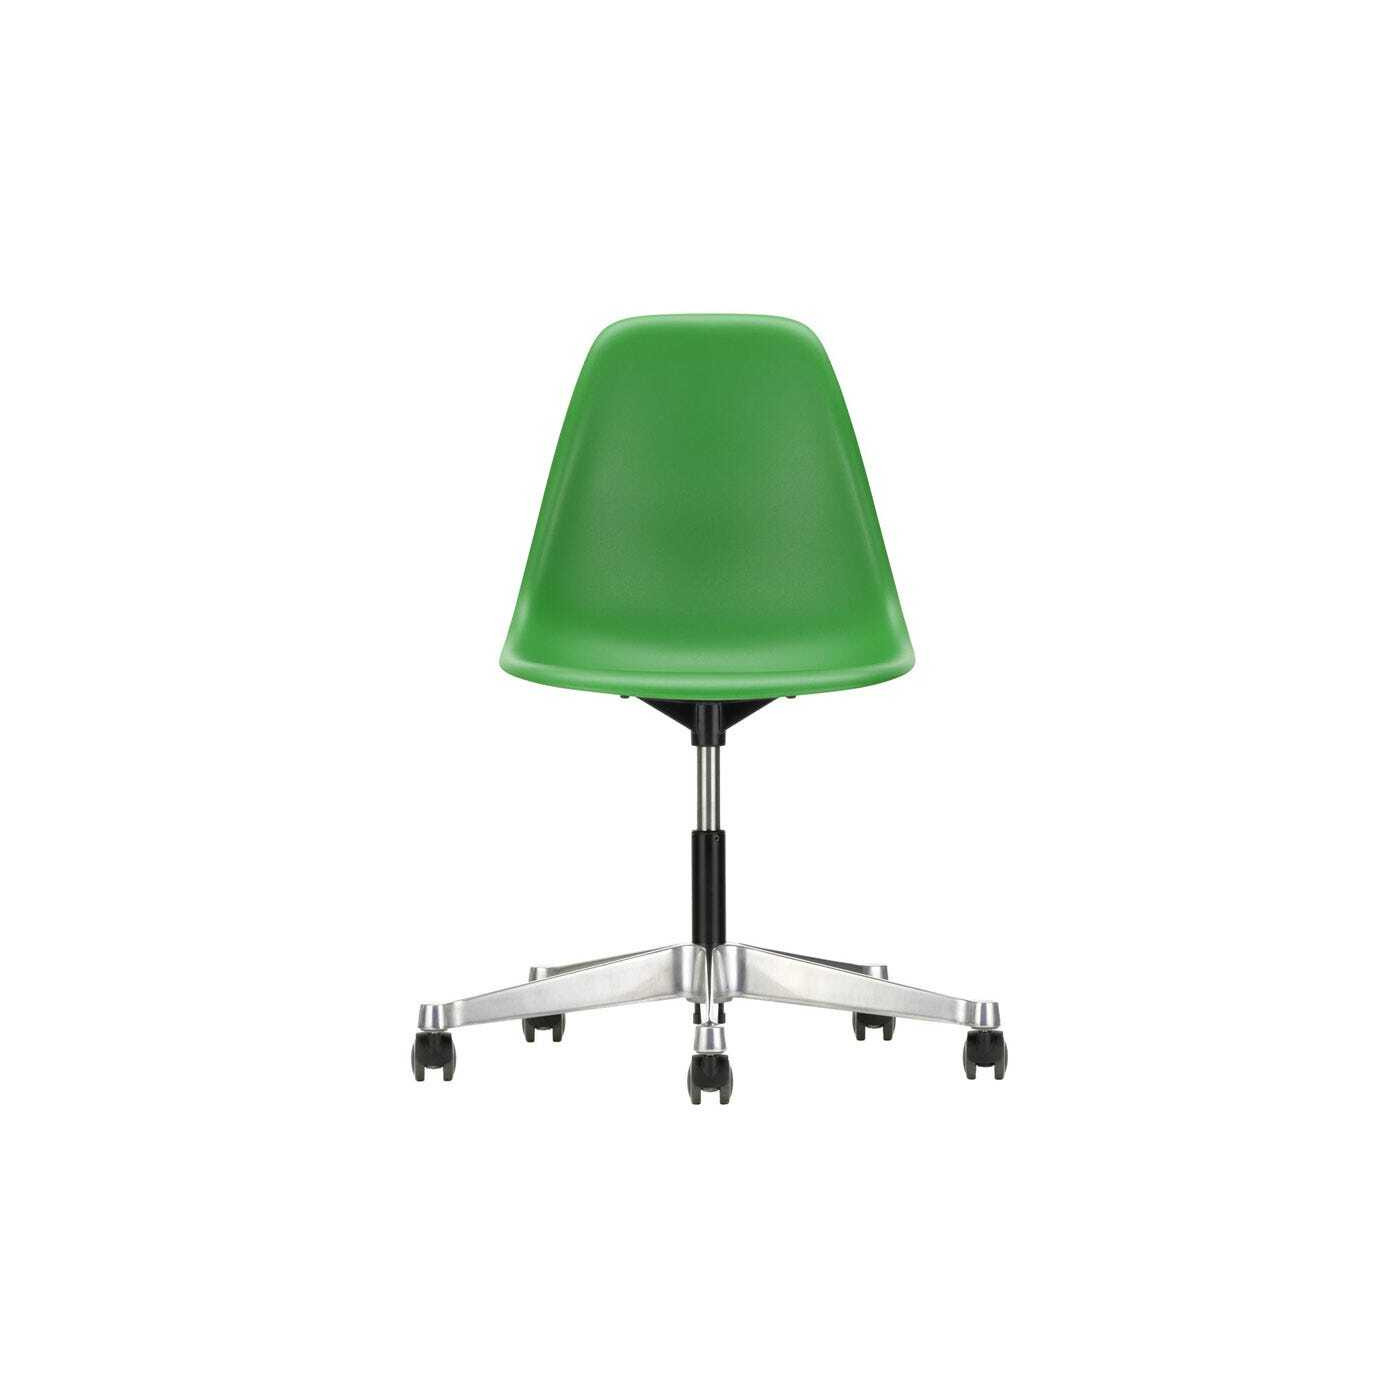 Vitra Eames PSCC Side Chair New Height Green Aluminium Base - Heal's UK Furniture - image 1